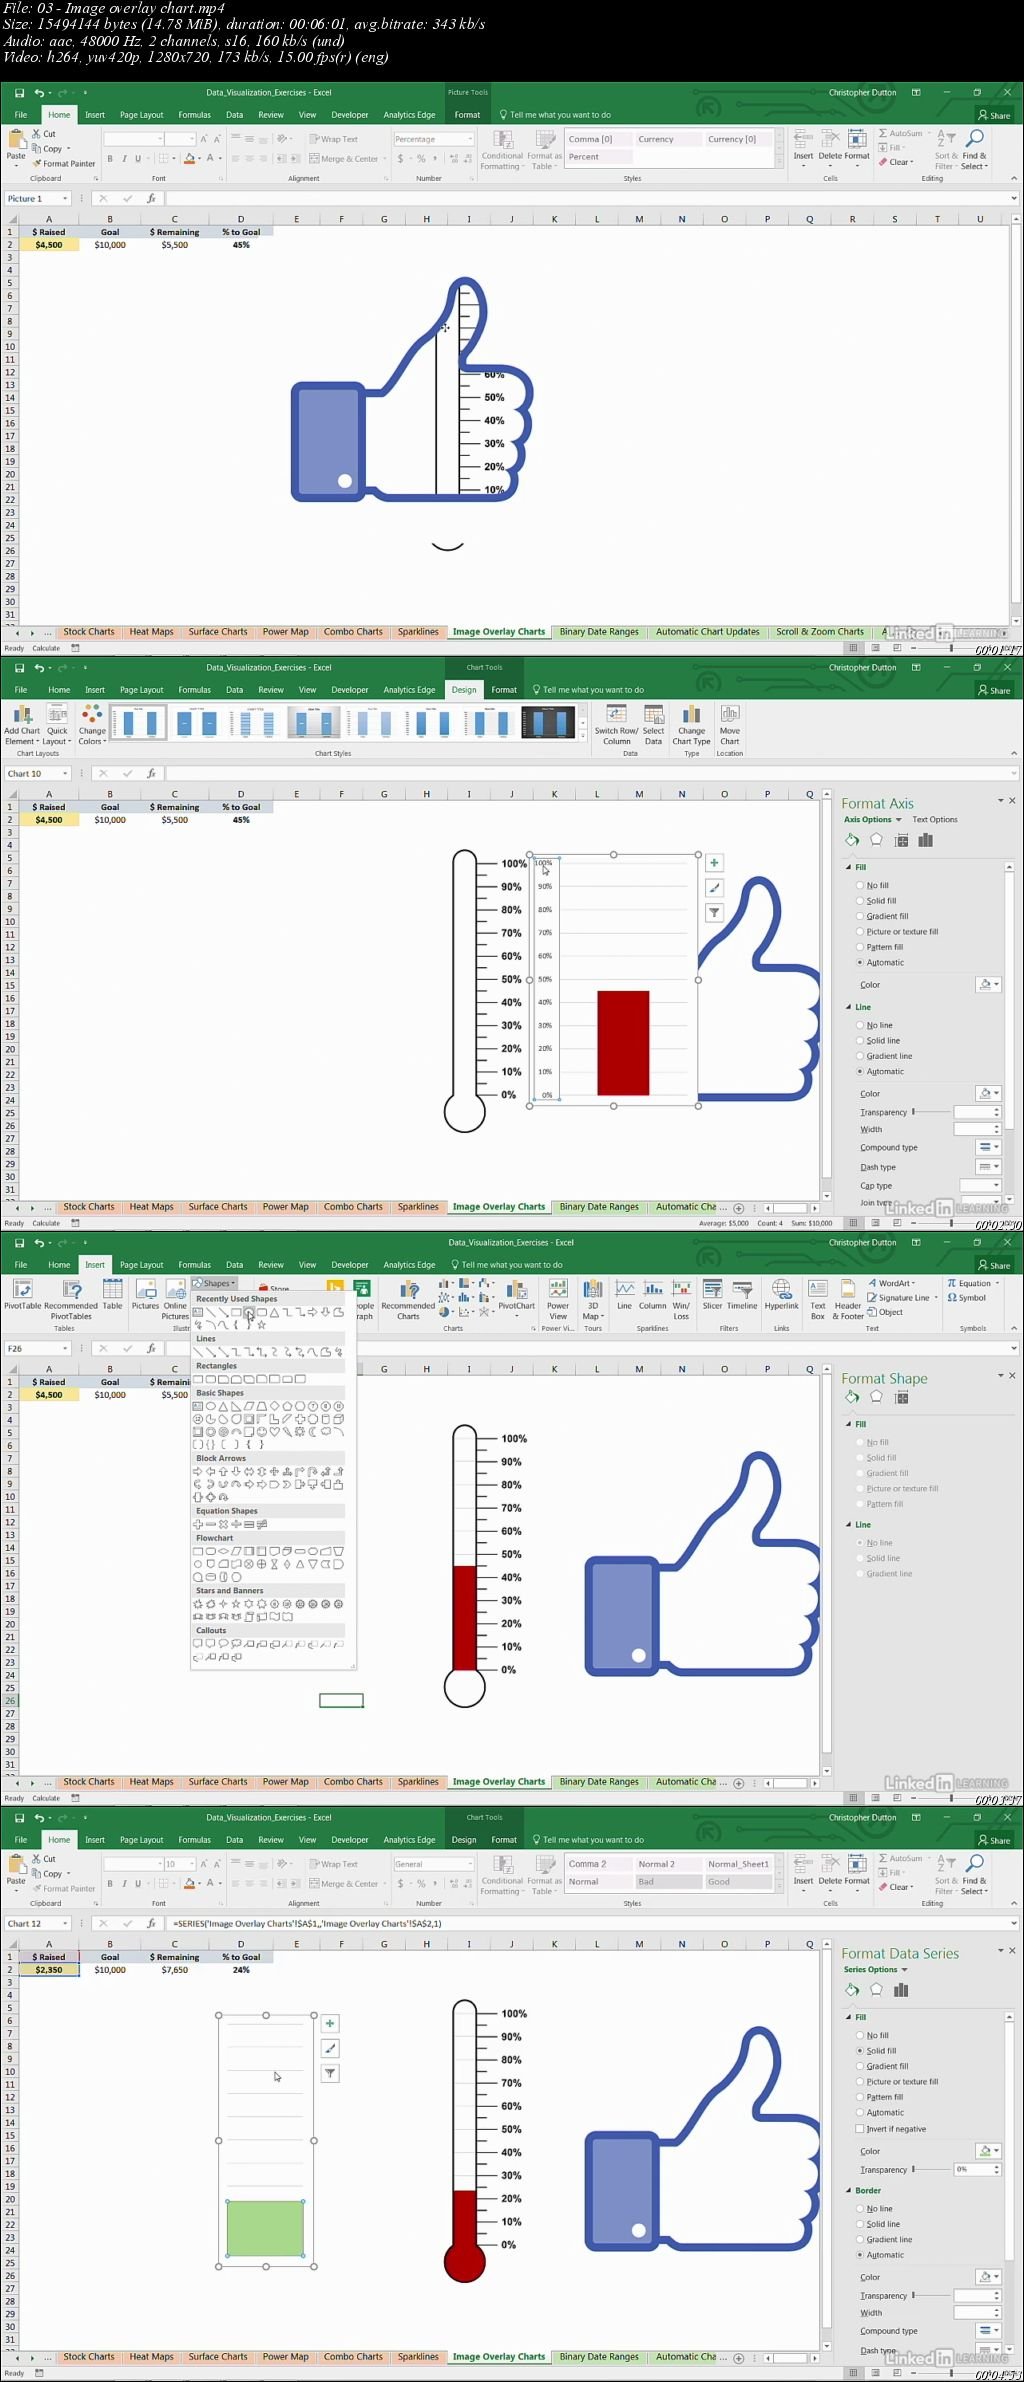 visualize data excel